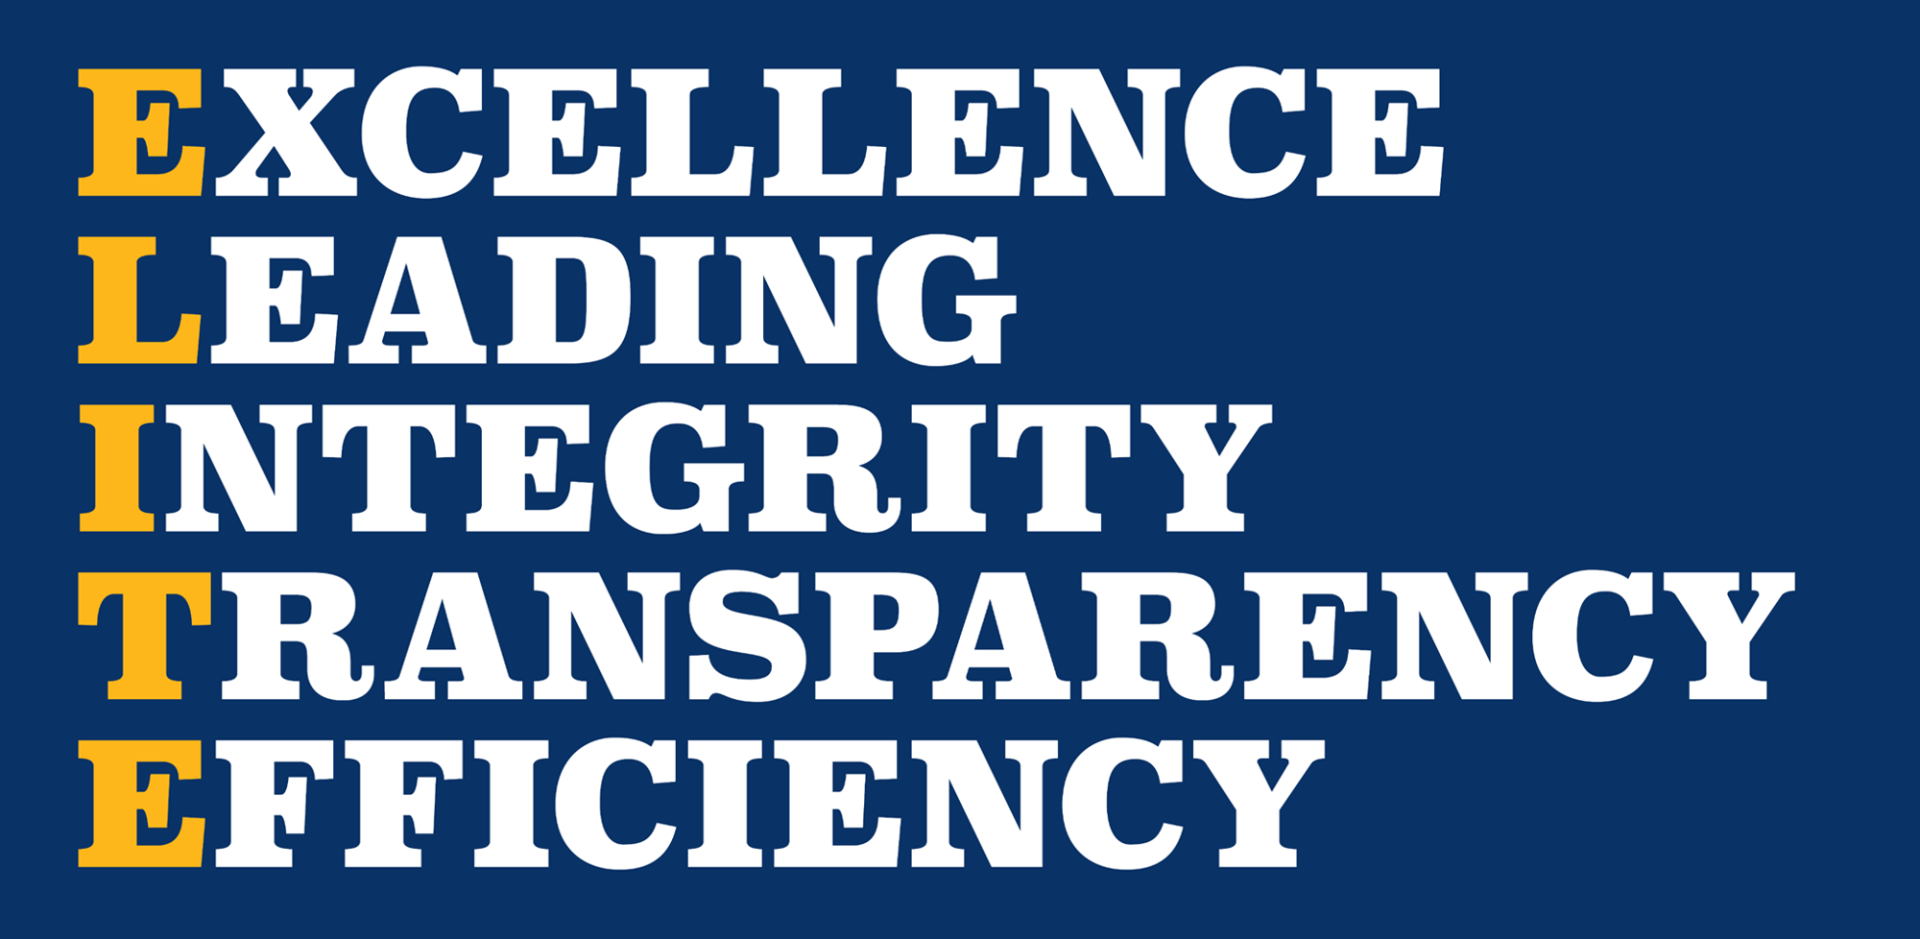 ELITE. Excellence, Leading, Integrity, Transparency, Efficiency